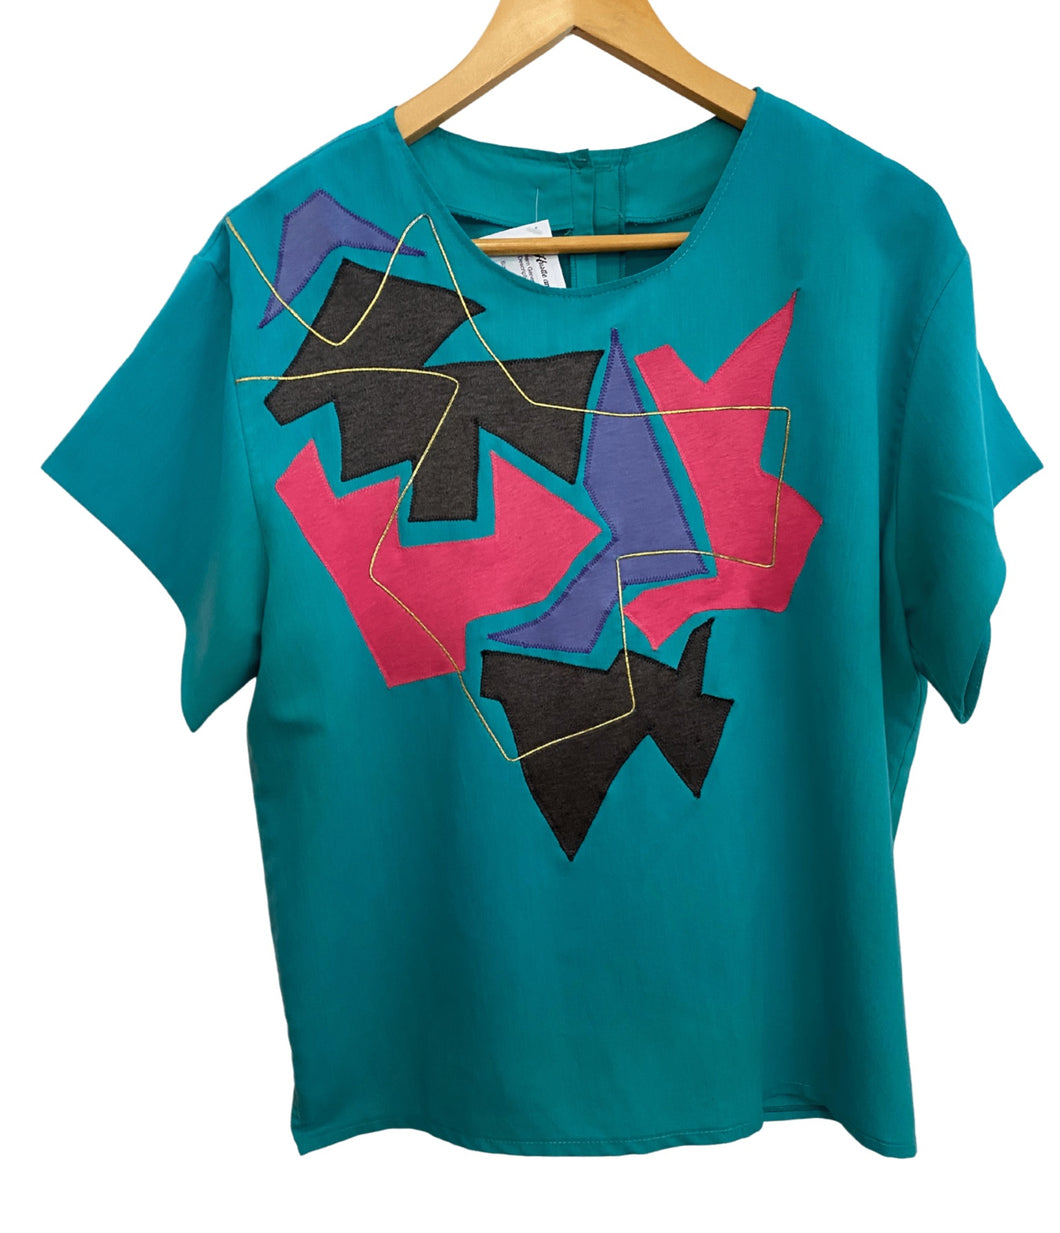 Teal Shirt with Geometric Designs